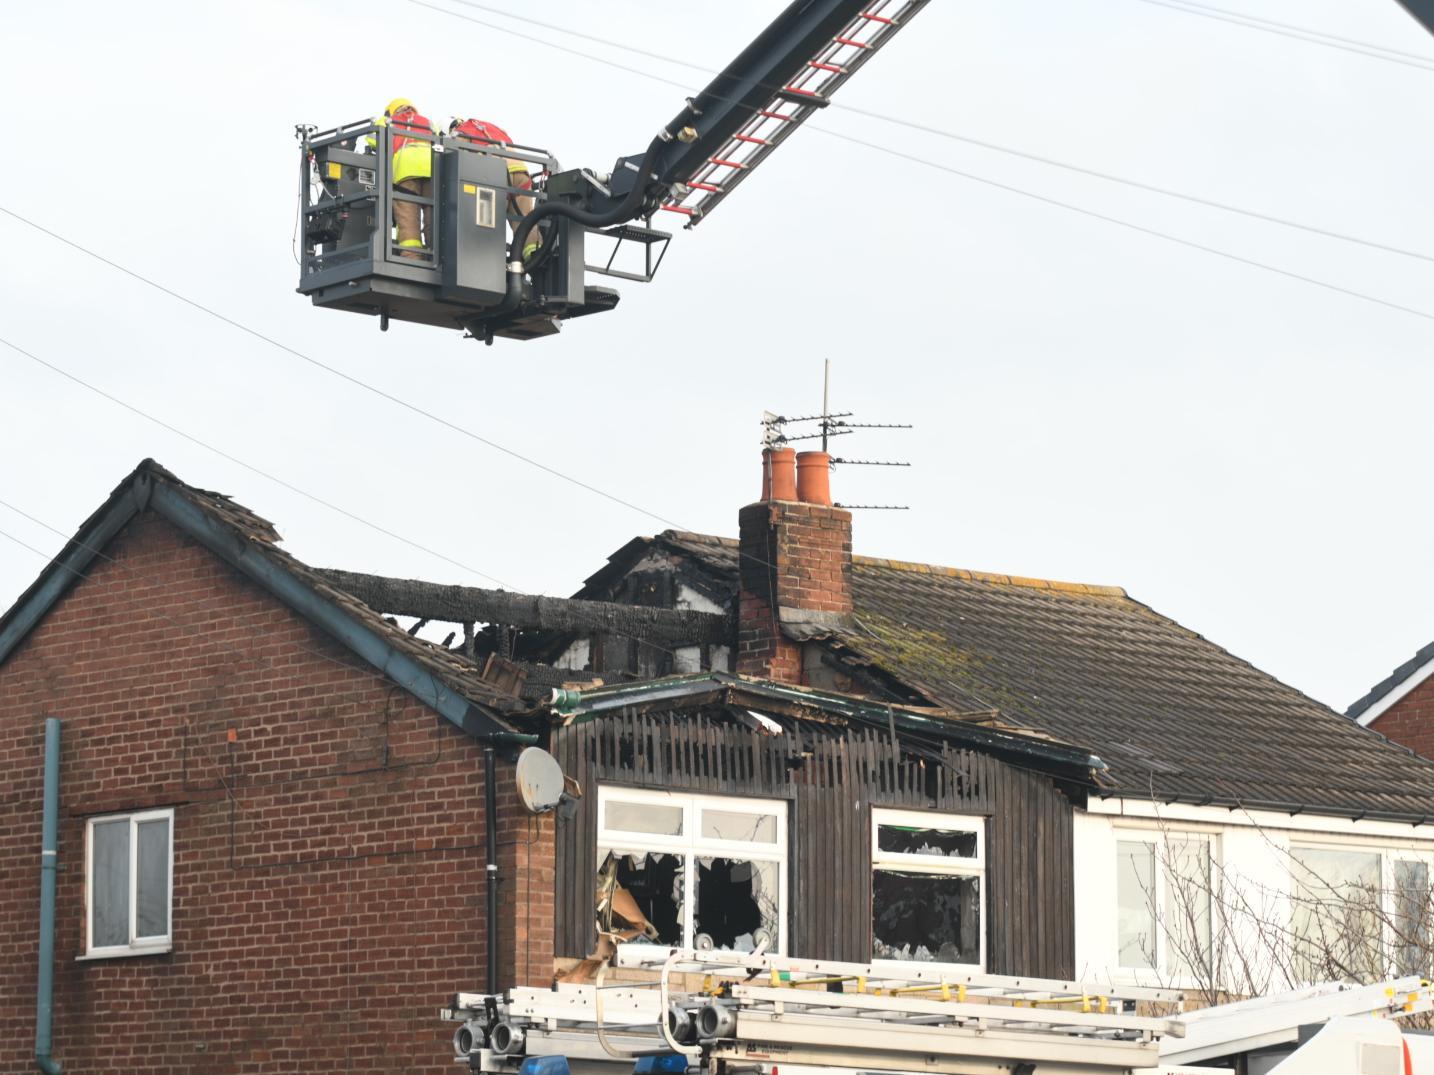 Six fire engines tackled the fire at its peak, alongside the aerial ladder platform and the drone unit equipped with a thermal imaging camera